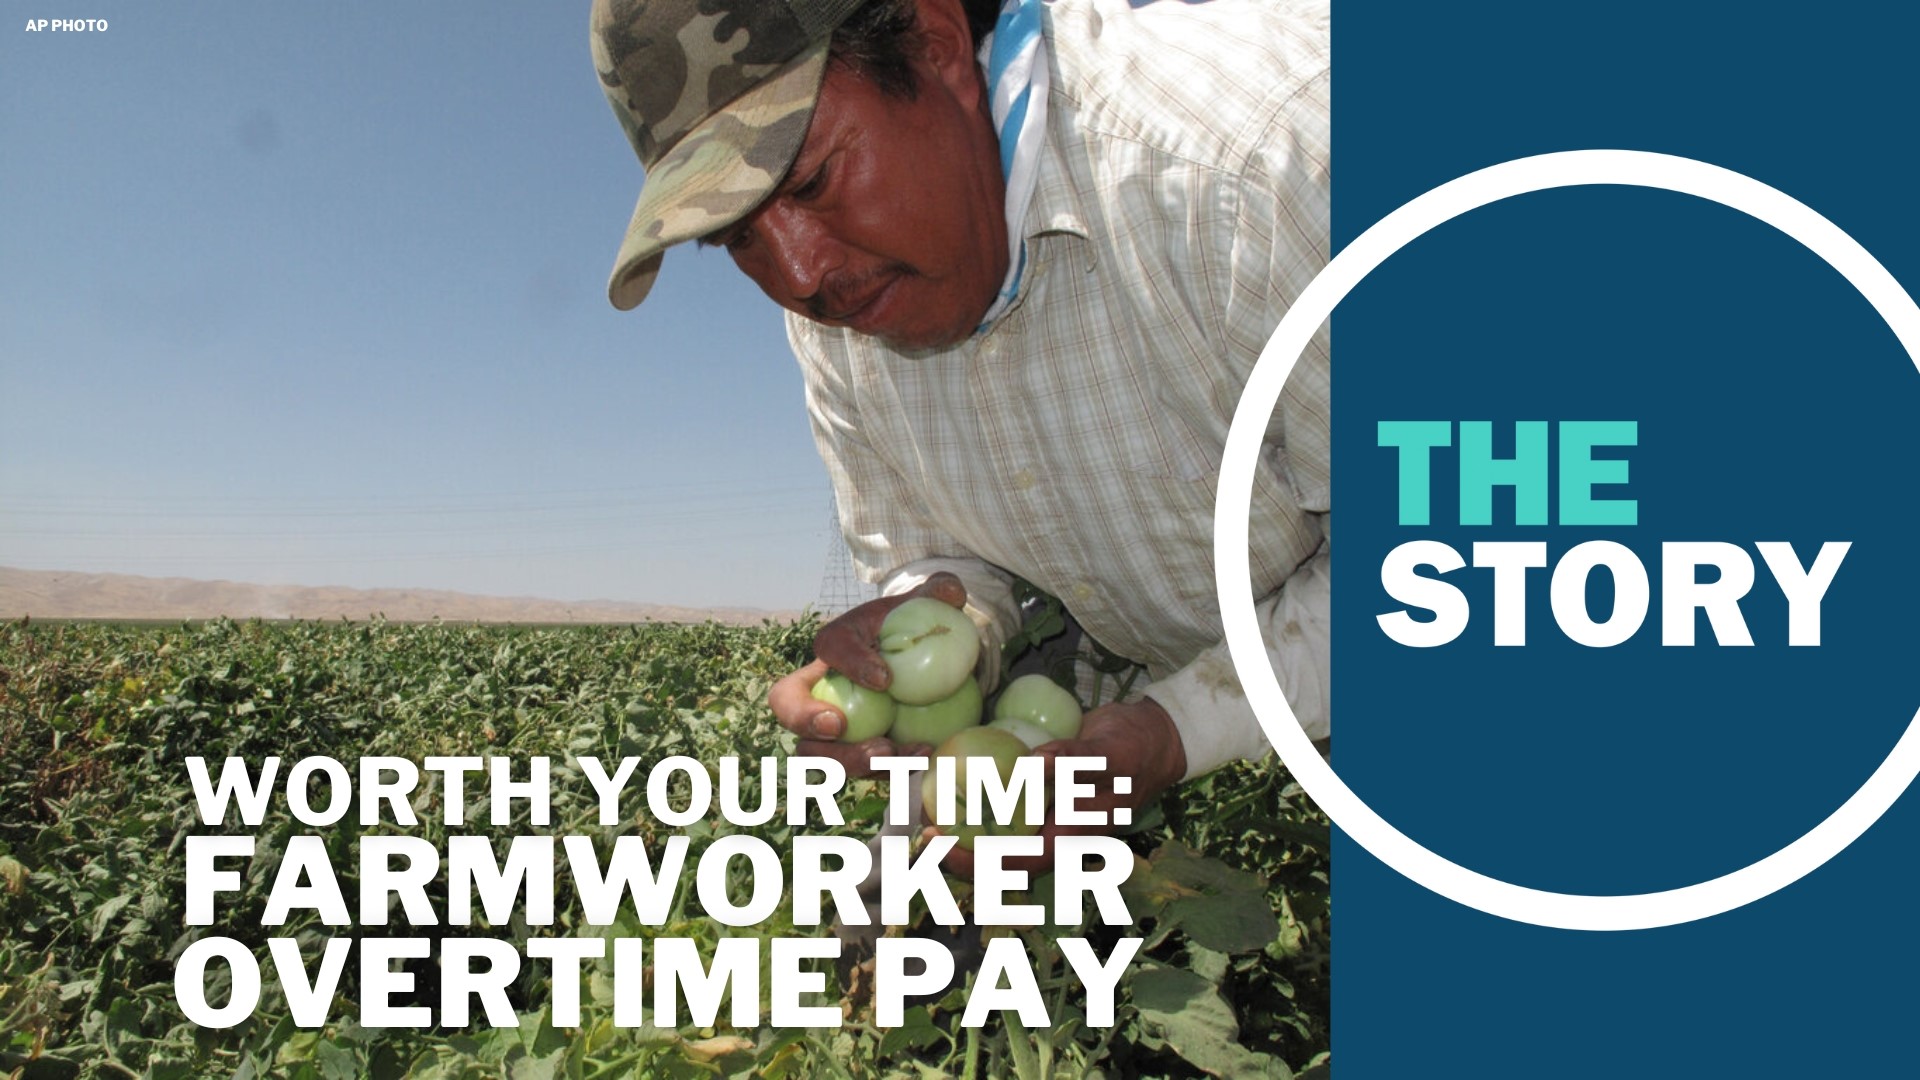 The Sacramento Bee spoke to California farmworkers about their state’s overtime law. We think it’s worth your time.